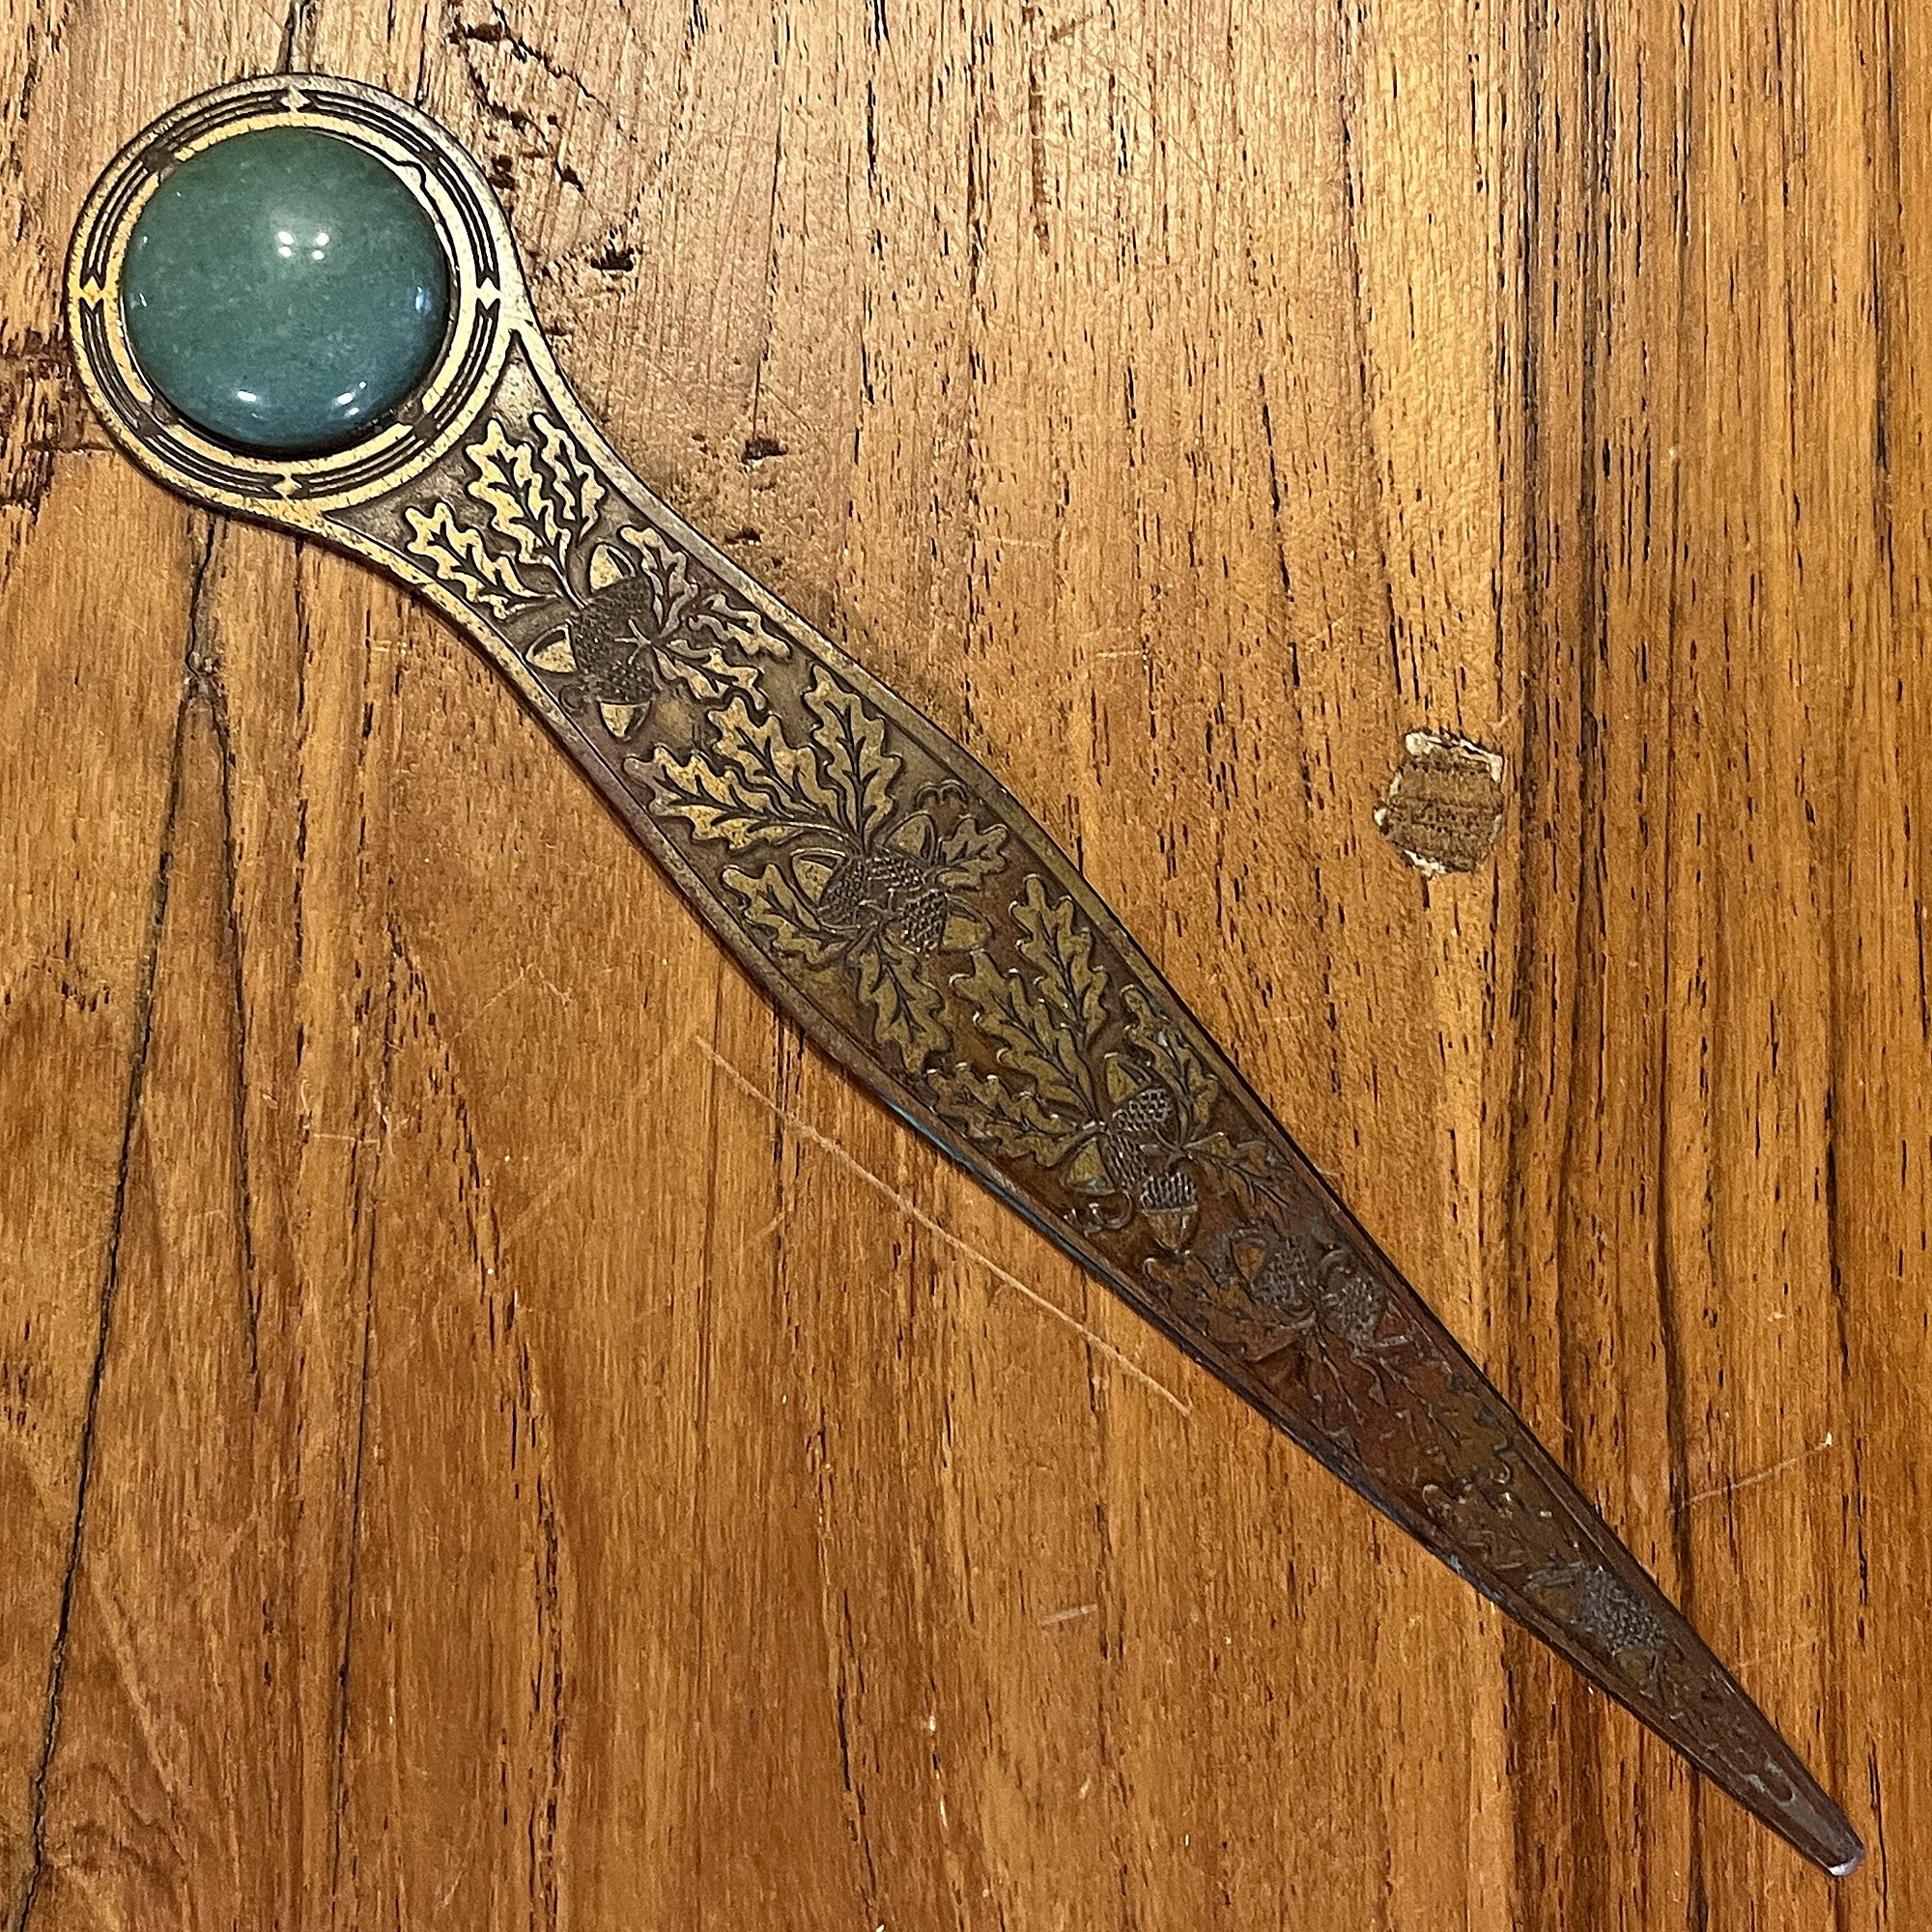 Sometimes a quick repair can give something a whole new life. When we found this copper letter opener, the cabochon was missing and the copper was so filthy that its oak-leaf pattern was barely visible. We cleaned it up in our workshop and added a be